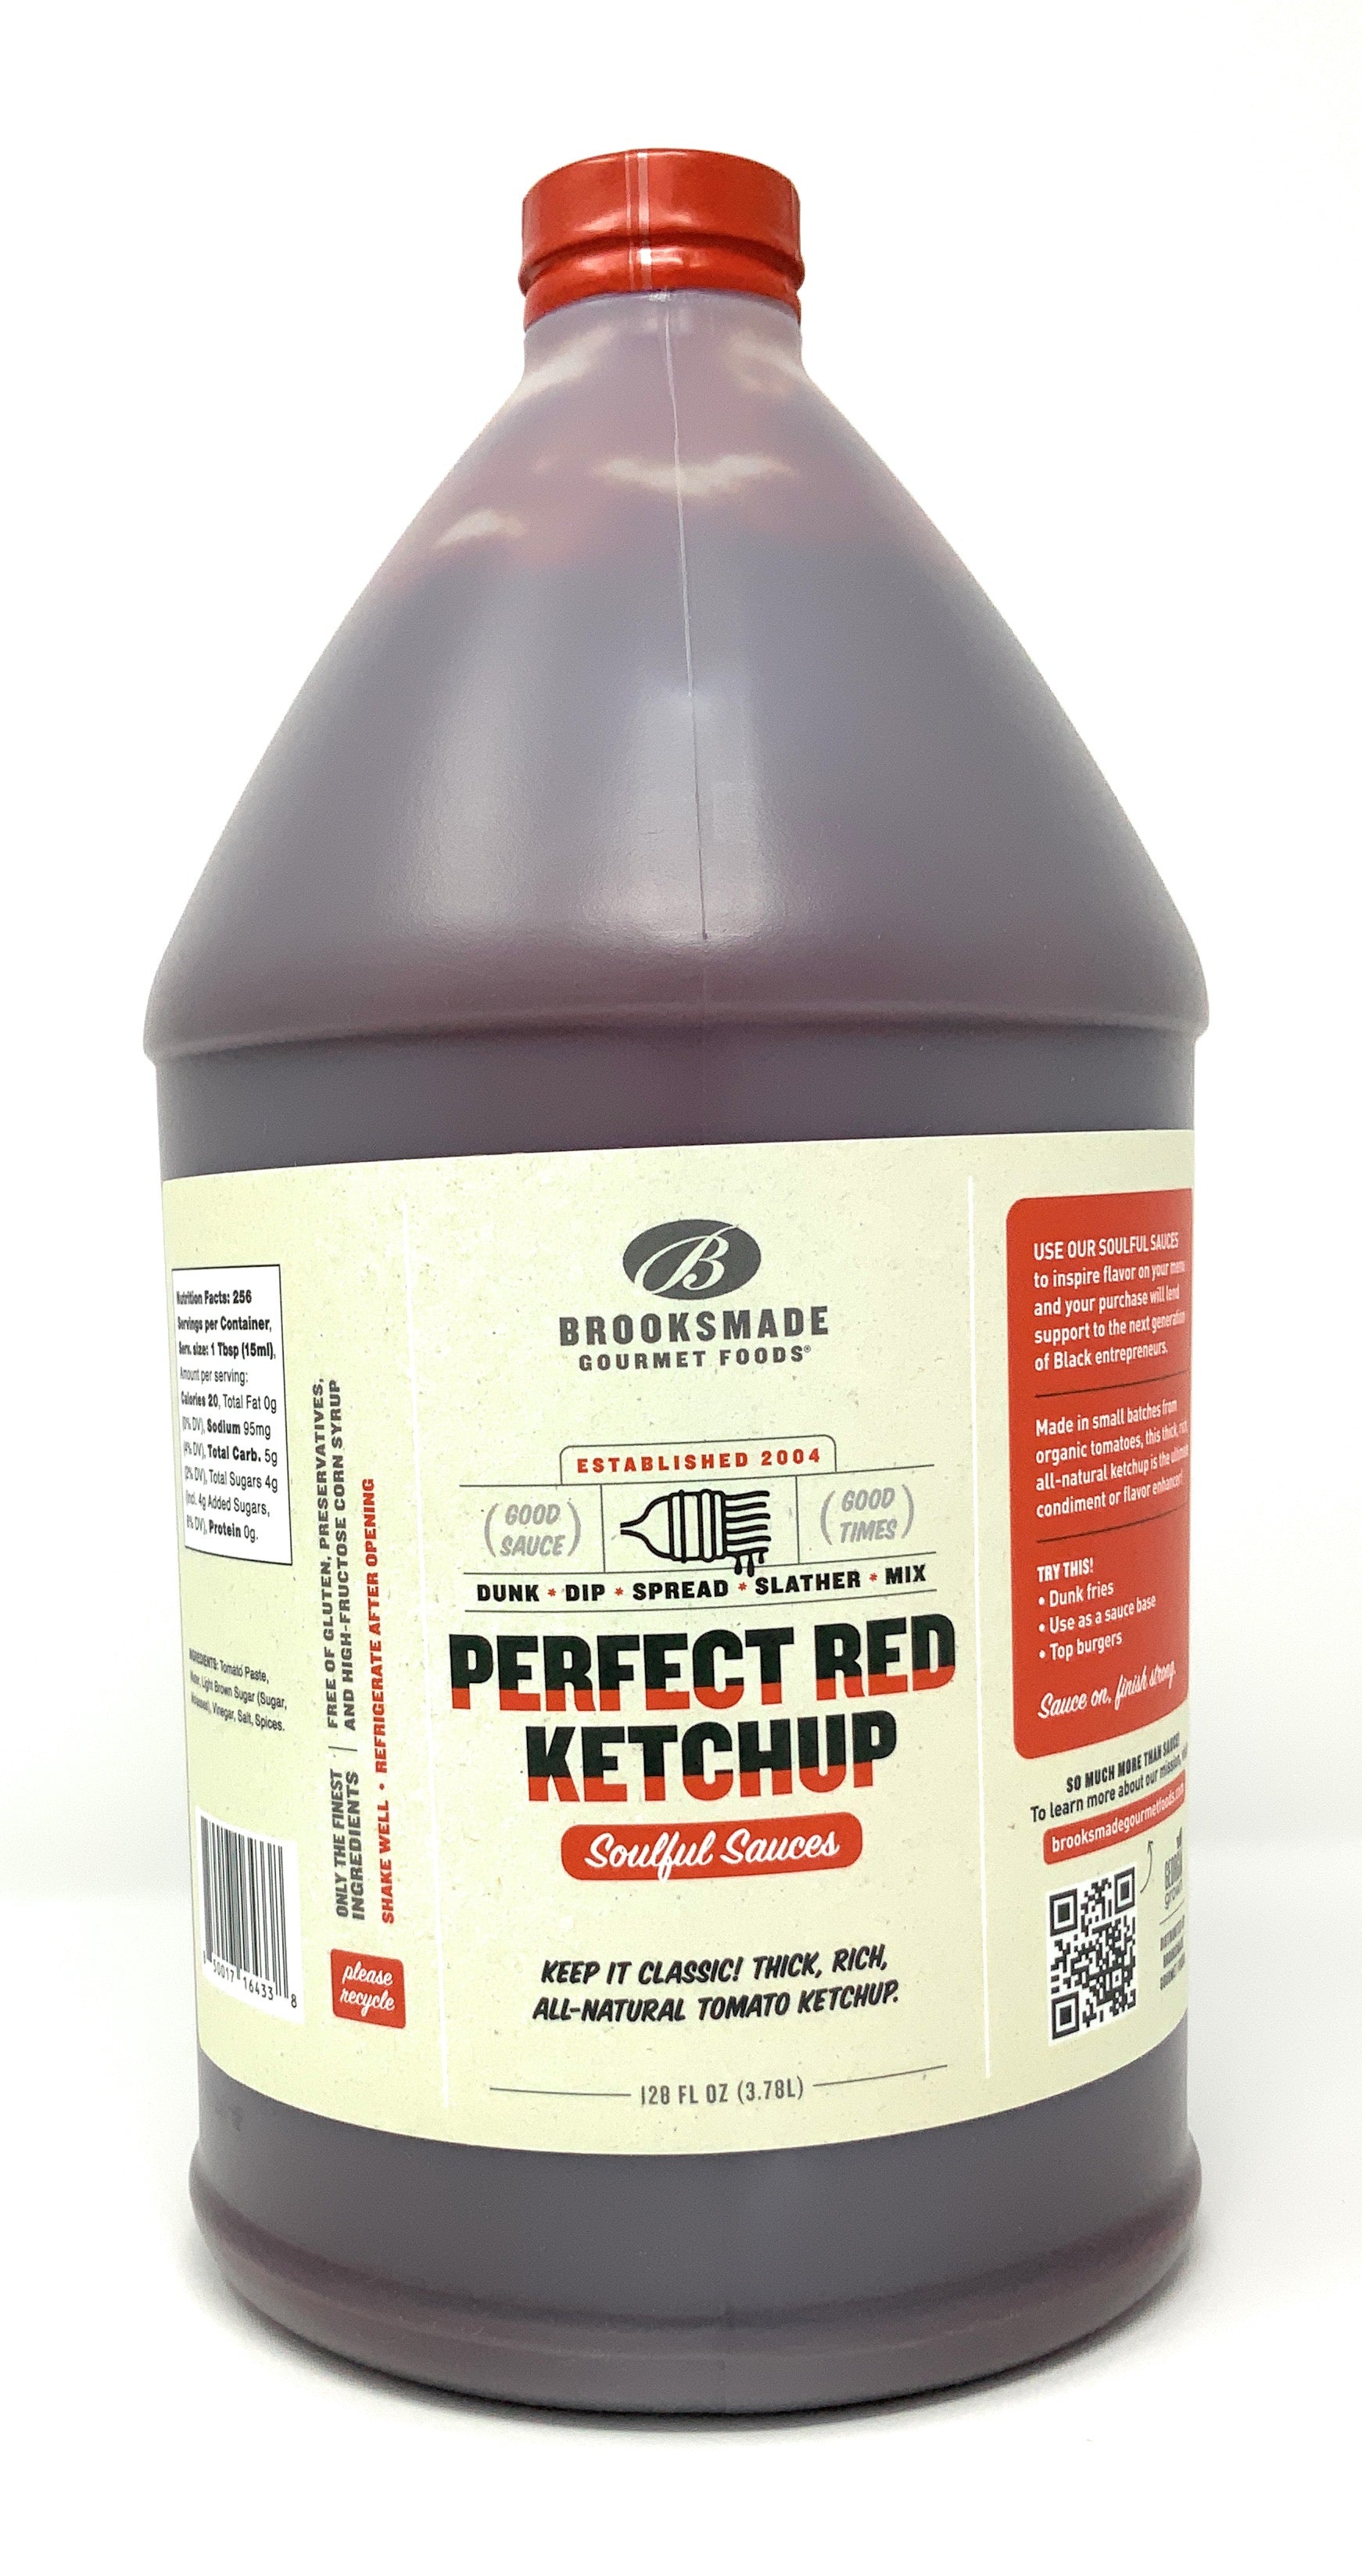 Perfect Red Ketchup, Gluten Free, No High Fructose Corn Syrup All-Natural Ketchup, Made with Organic Tomatoes, 128 oz